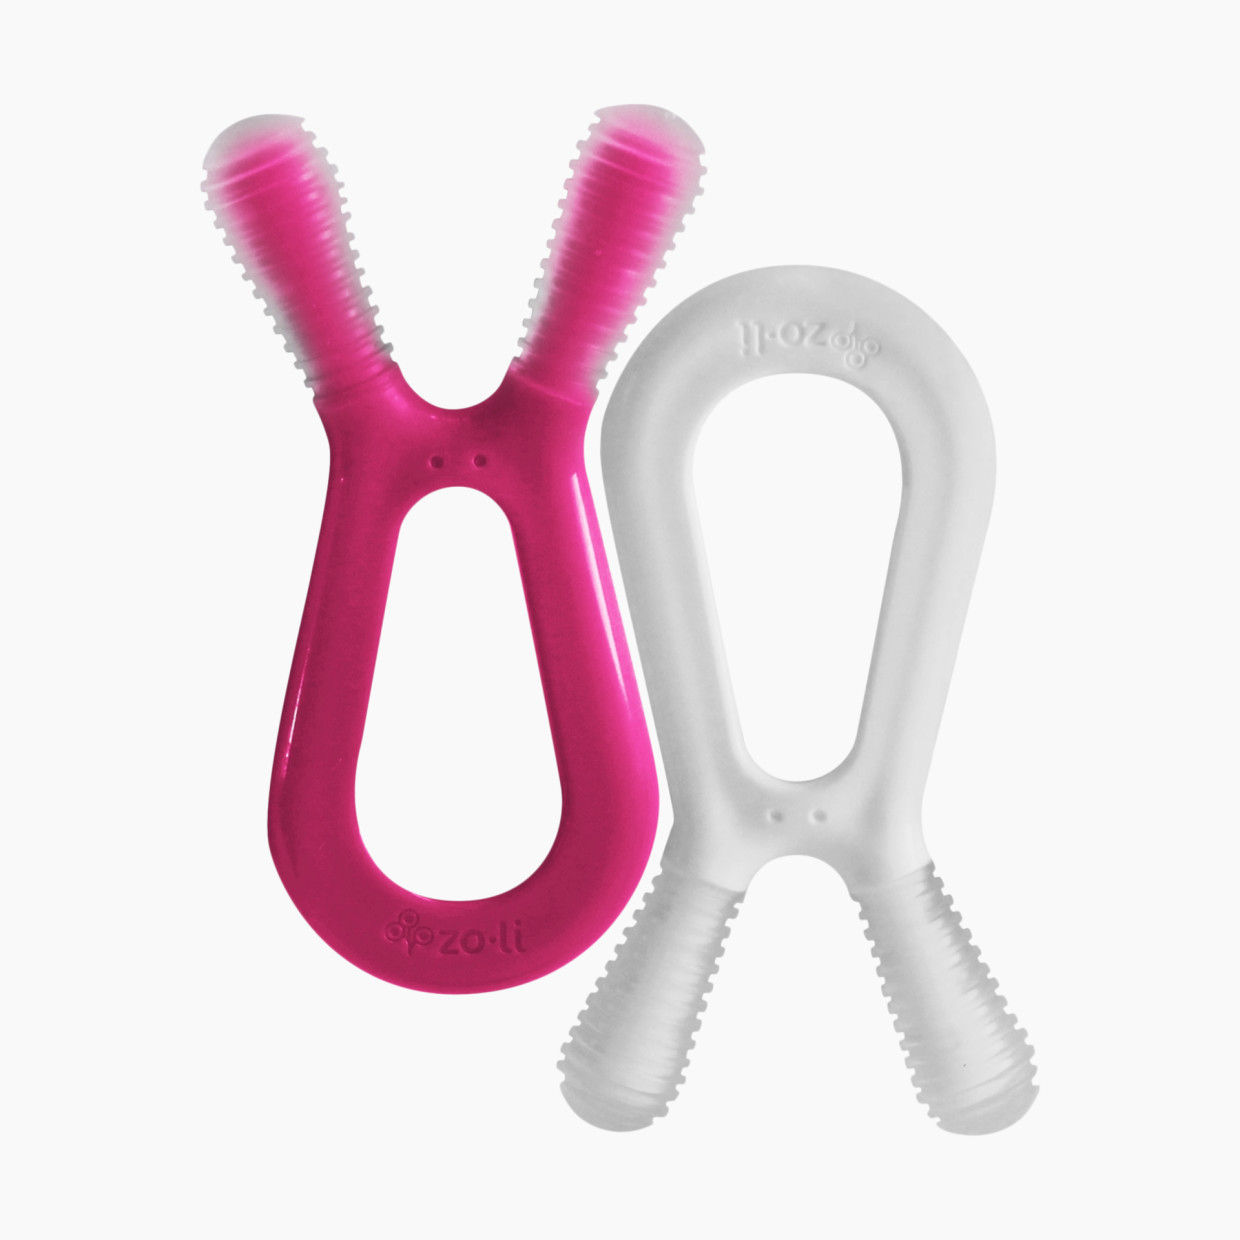 ZoLi BUNNY Teether (2 Pack) - Pink & White.